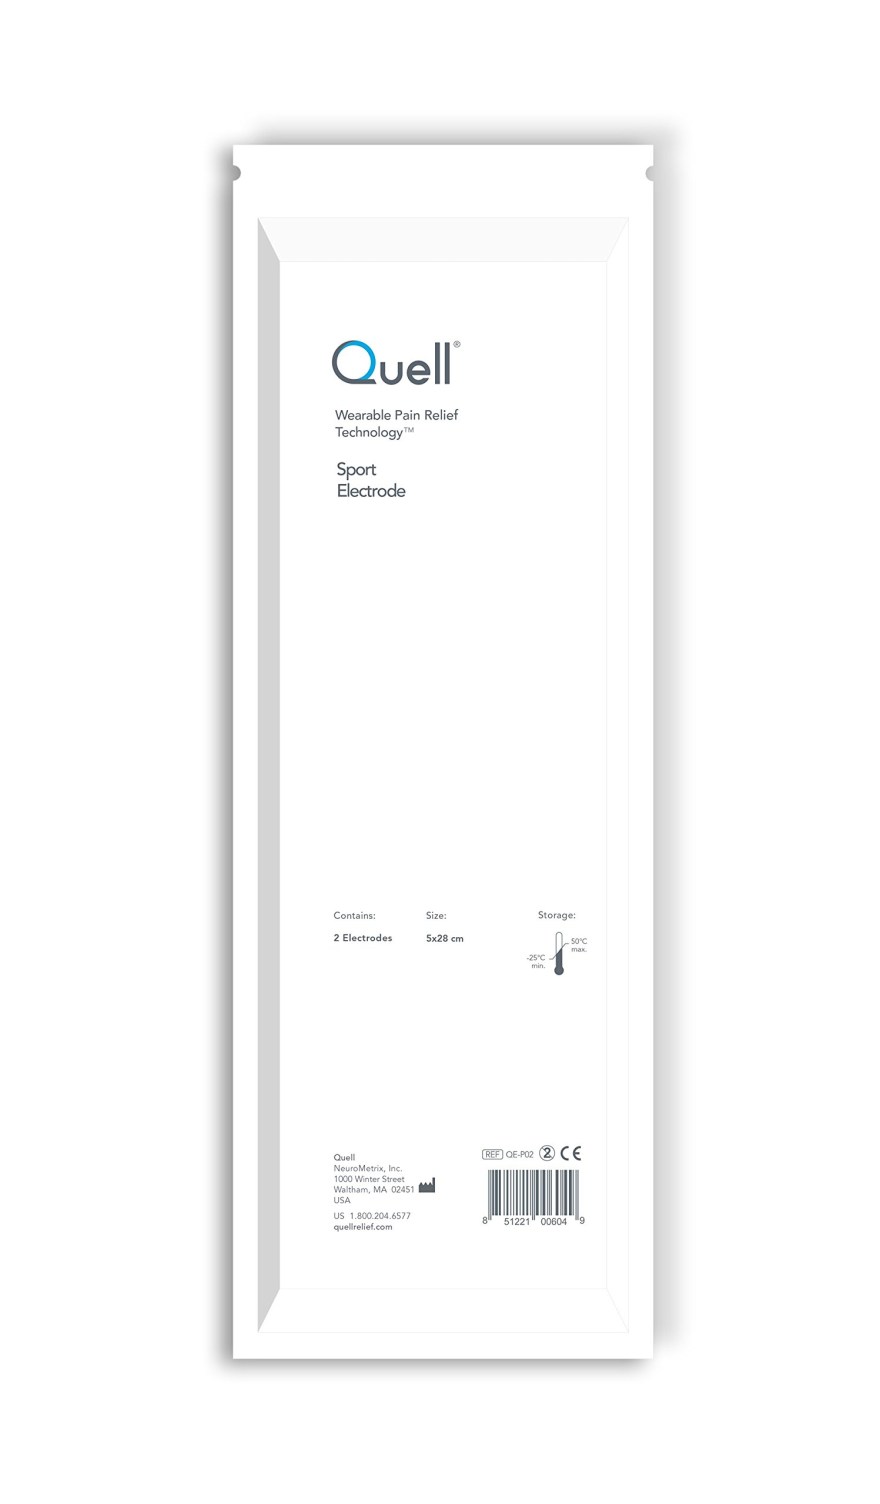 Picture of: Quell Sport Electrodes – One Month Supply : Amazon